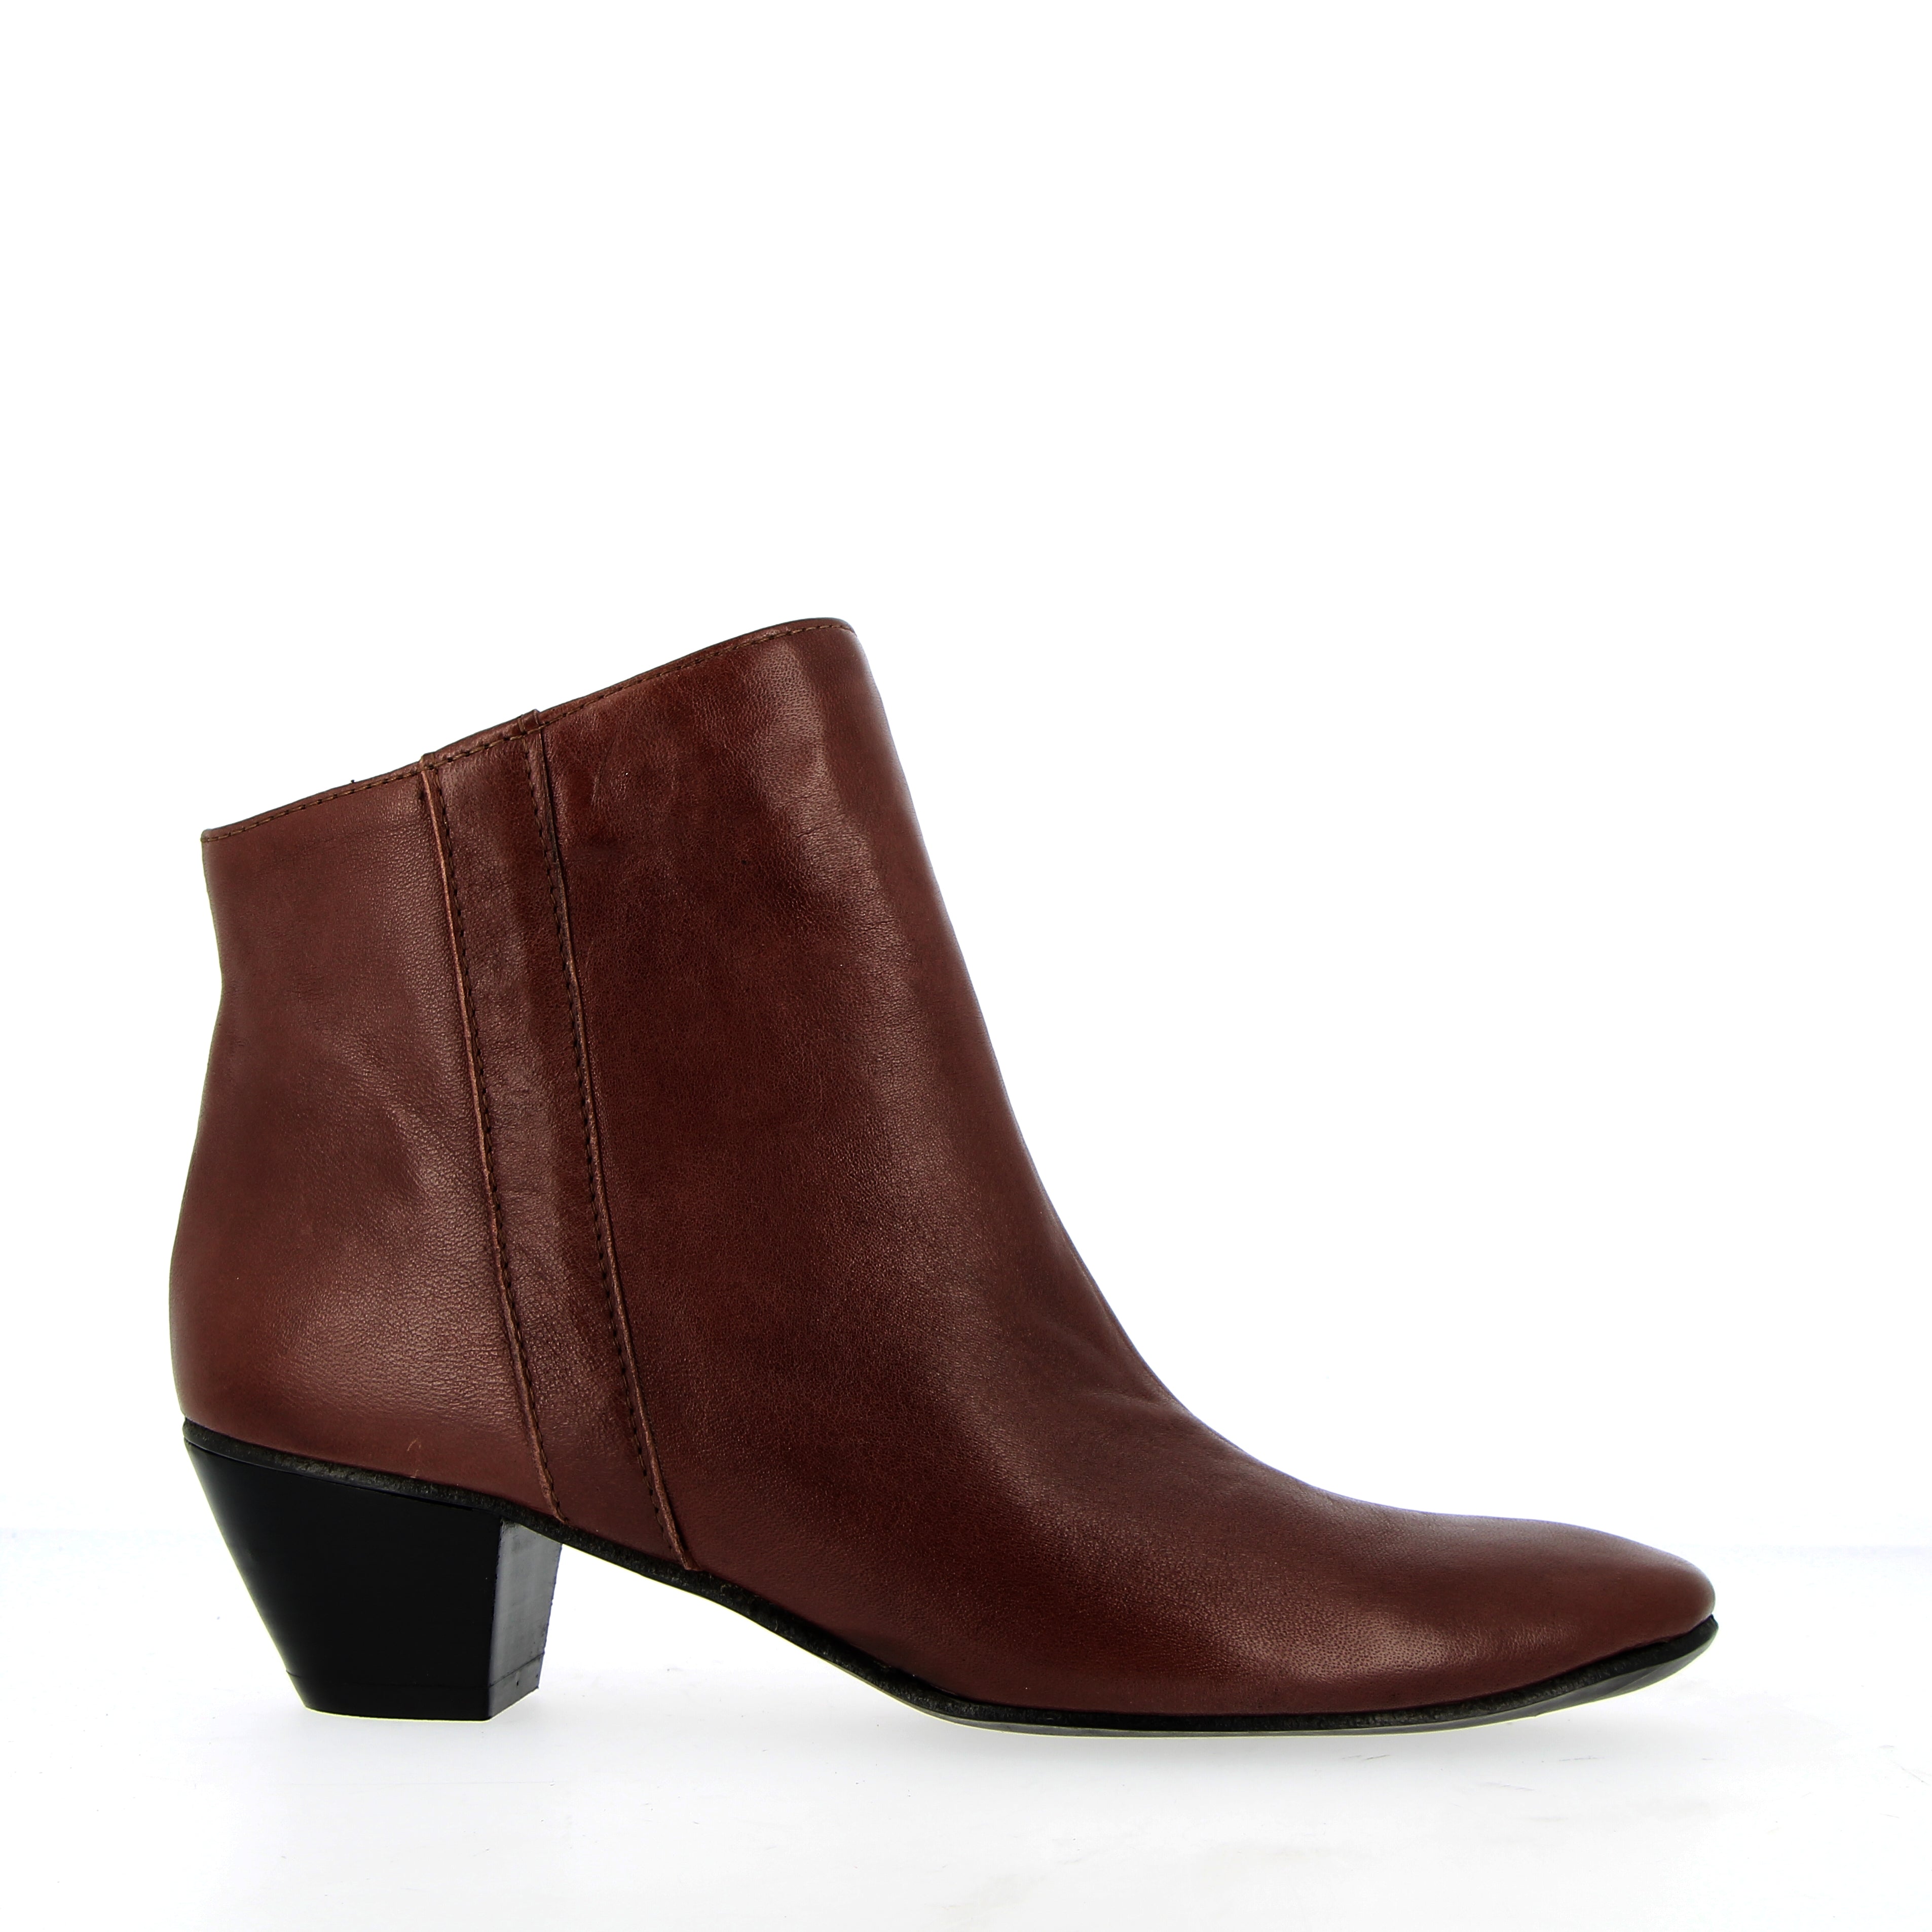 Soft bohemian leather ankle boot with zip